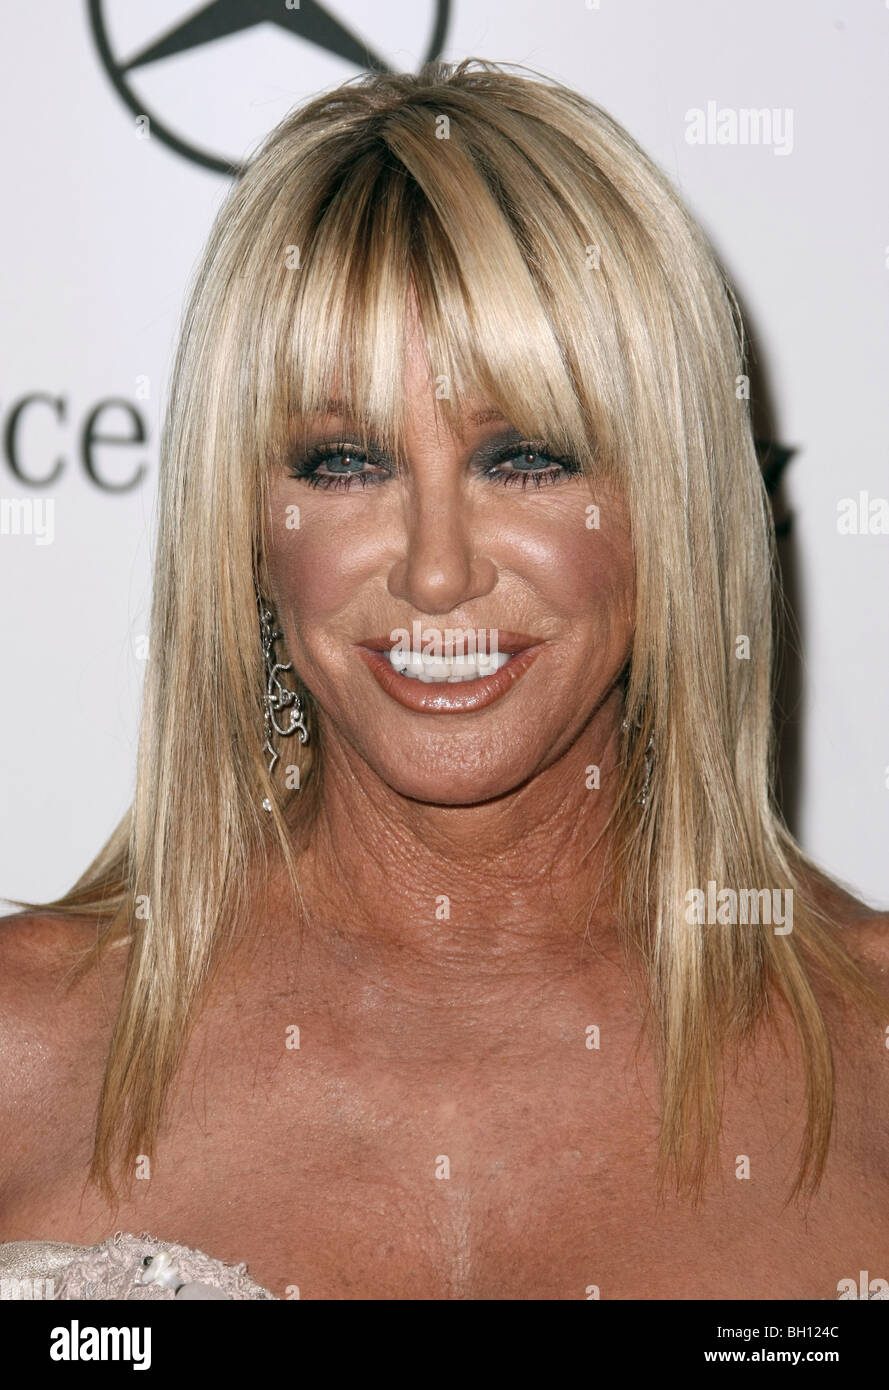 SUZANNE SOMERS ACTRESS BEVERLY HILLS  CA  USA 25/10/2008 Stock Photo